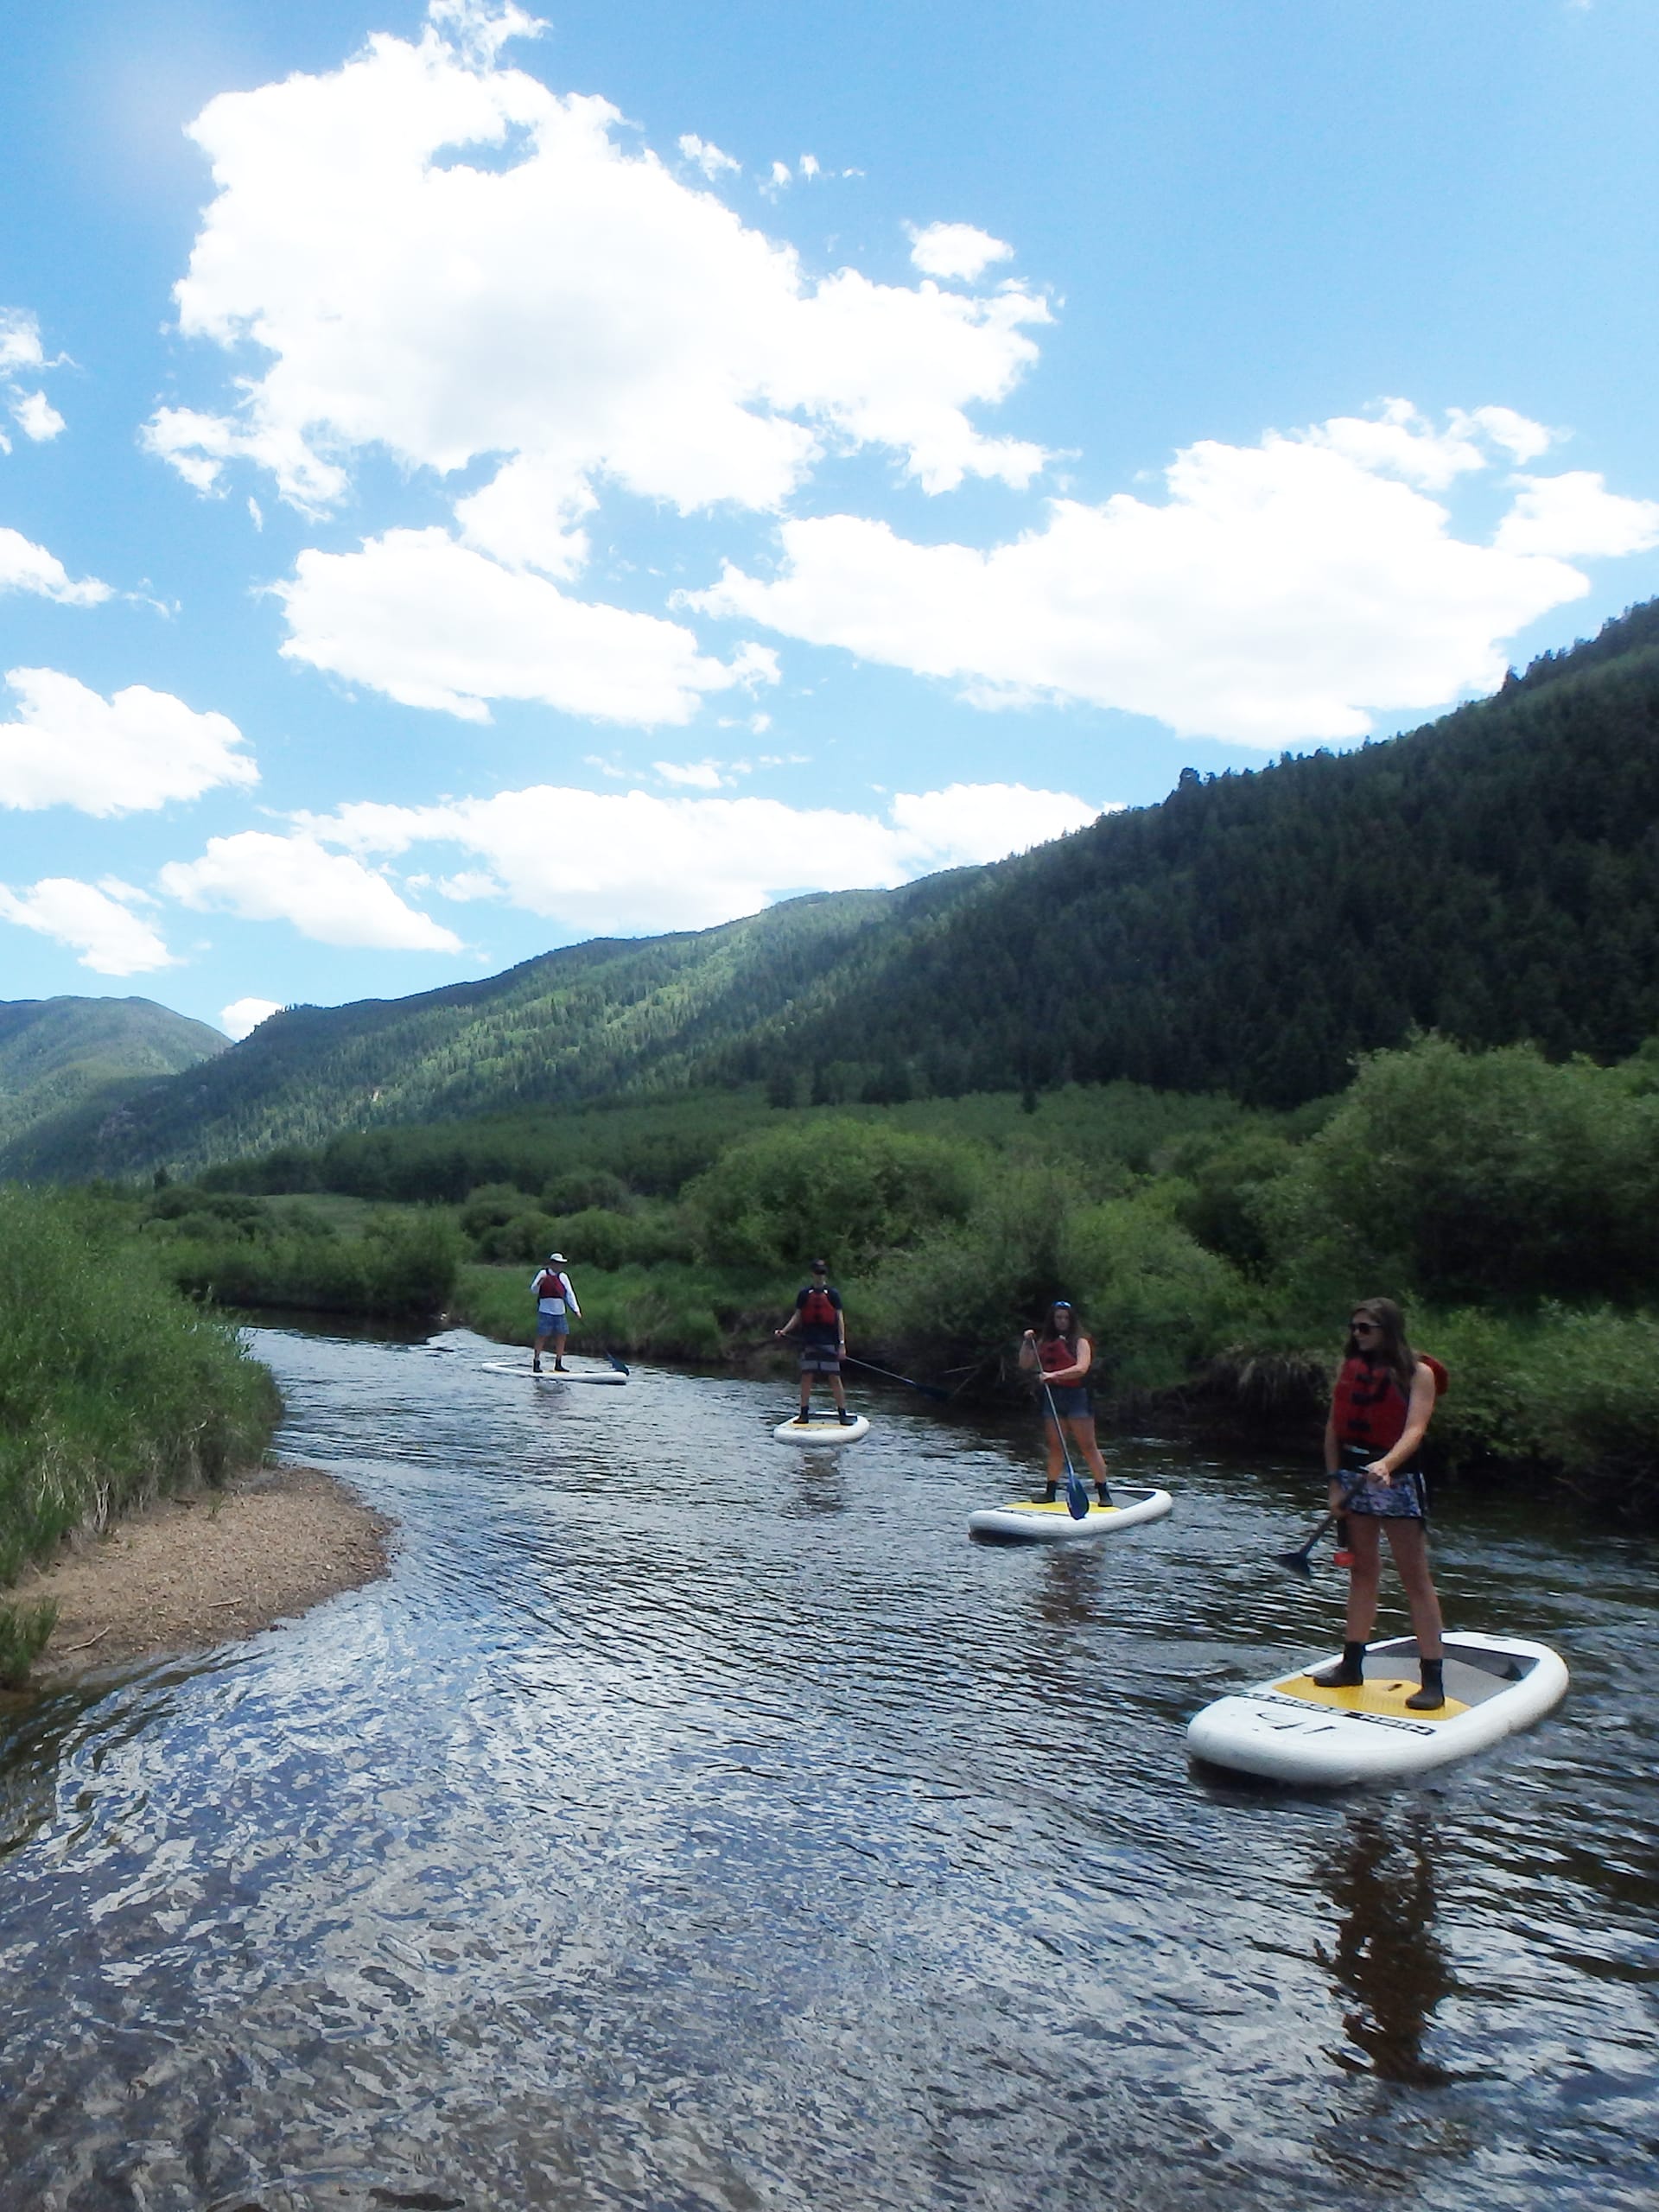 a group on stand up paddle boards on the river